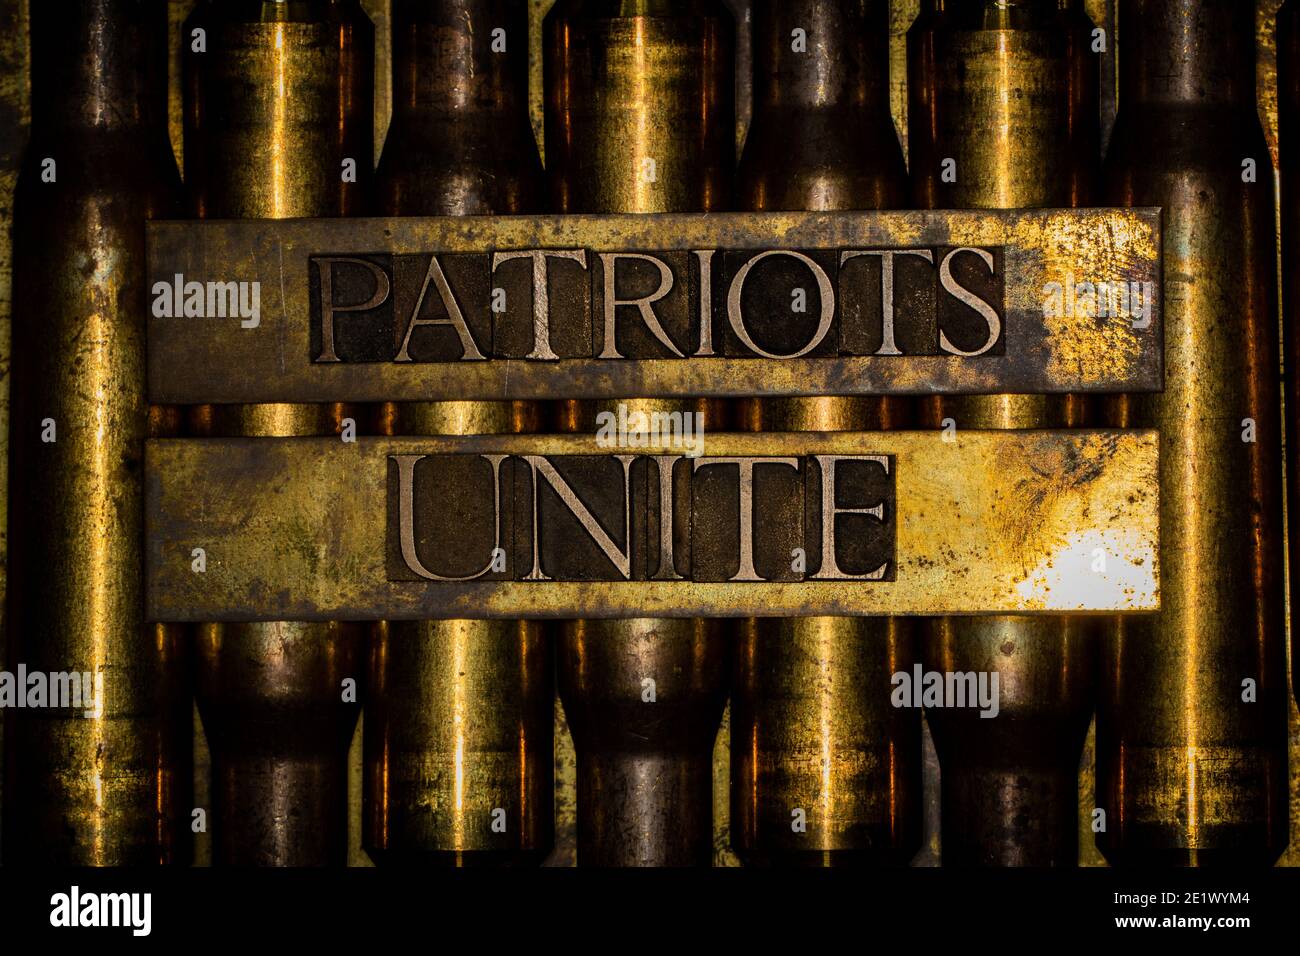 Patriots Unite text over copper 50 caliber bullet casings surrounded by barbed wire on grunge background Stock Photo